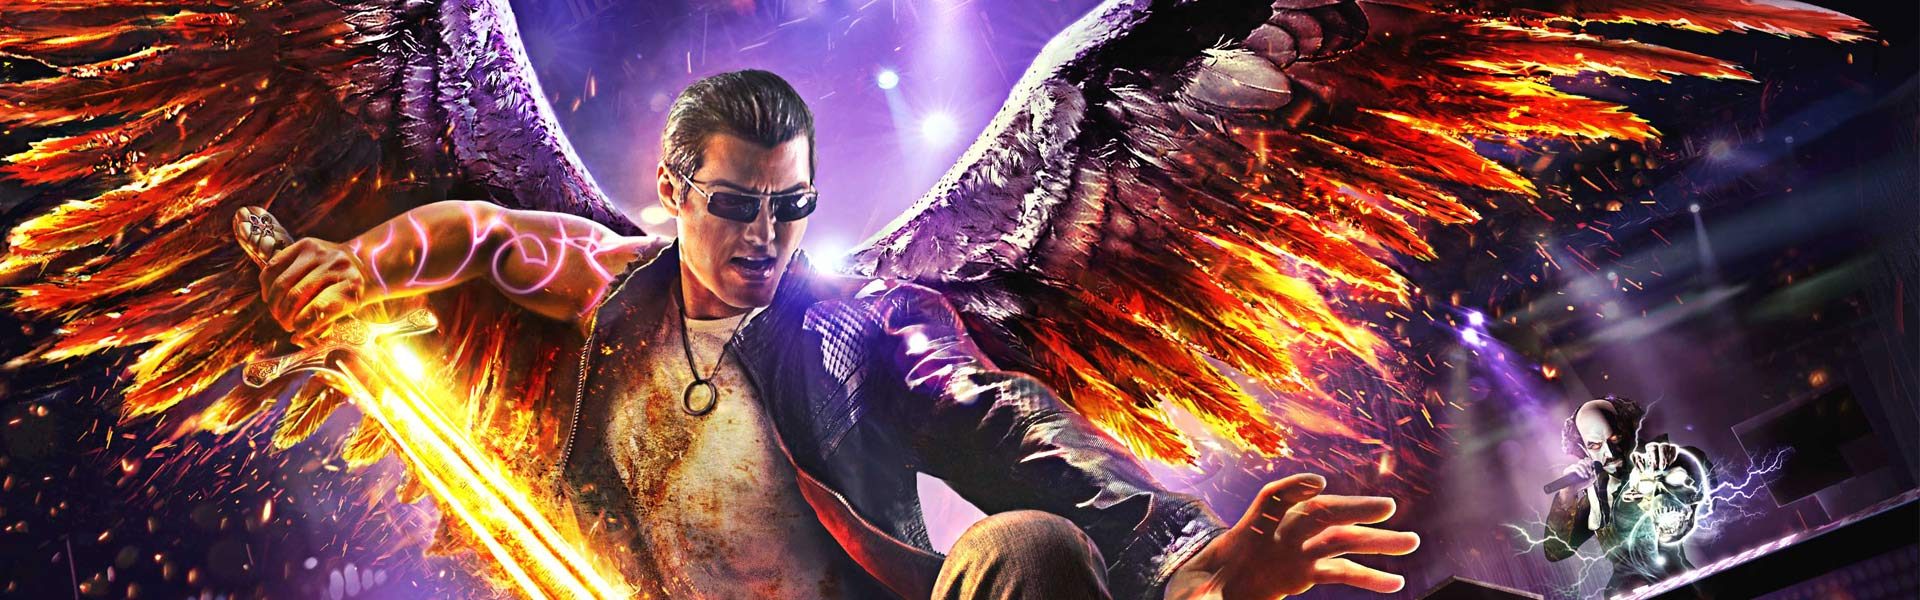 saints row gat out of hell cheat codes ps4